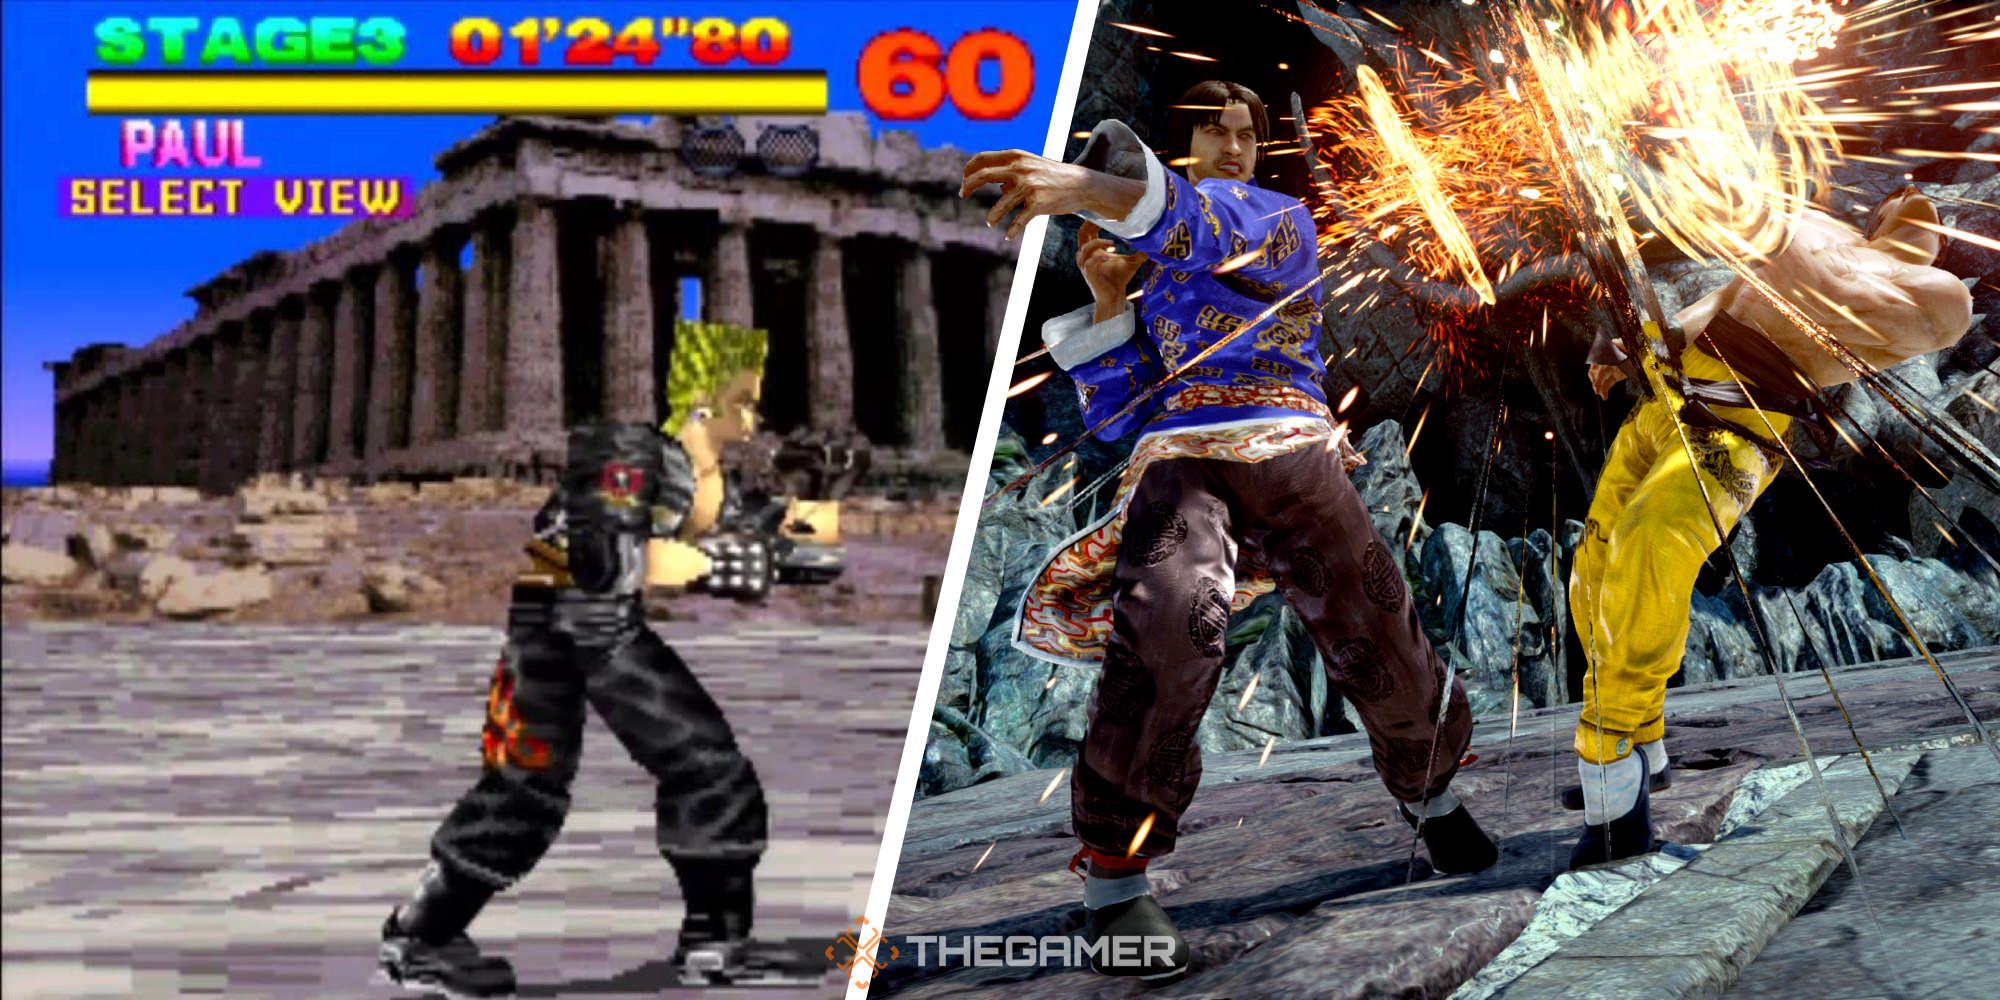 A collage showing a gameplay screenshot of the original Tekken on the left and one from Tekken 7 on the right.